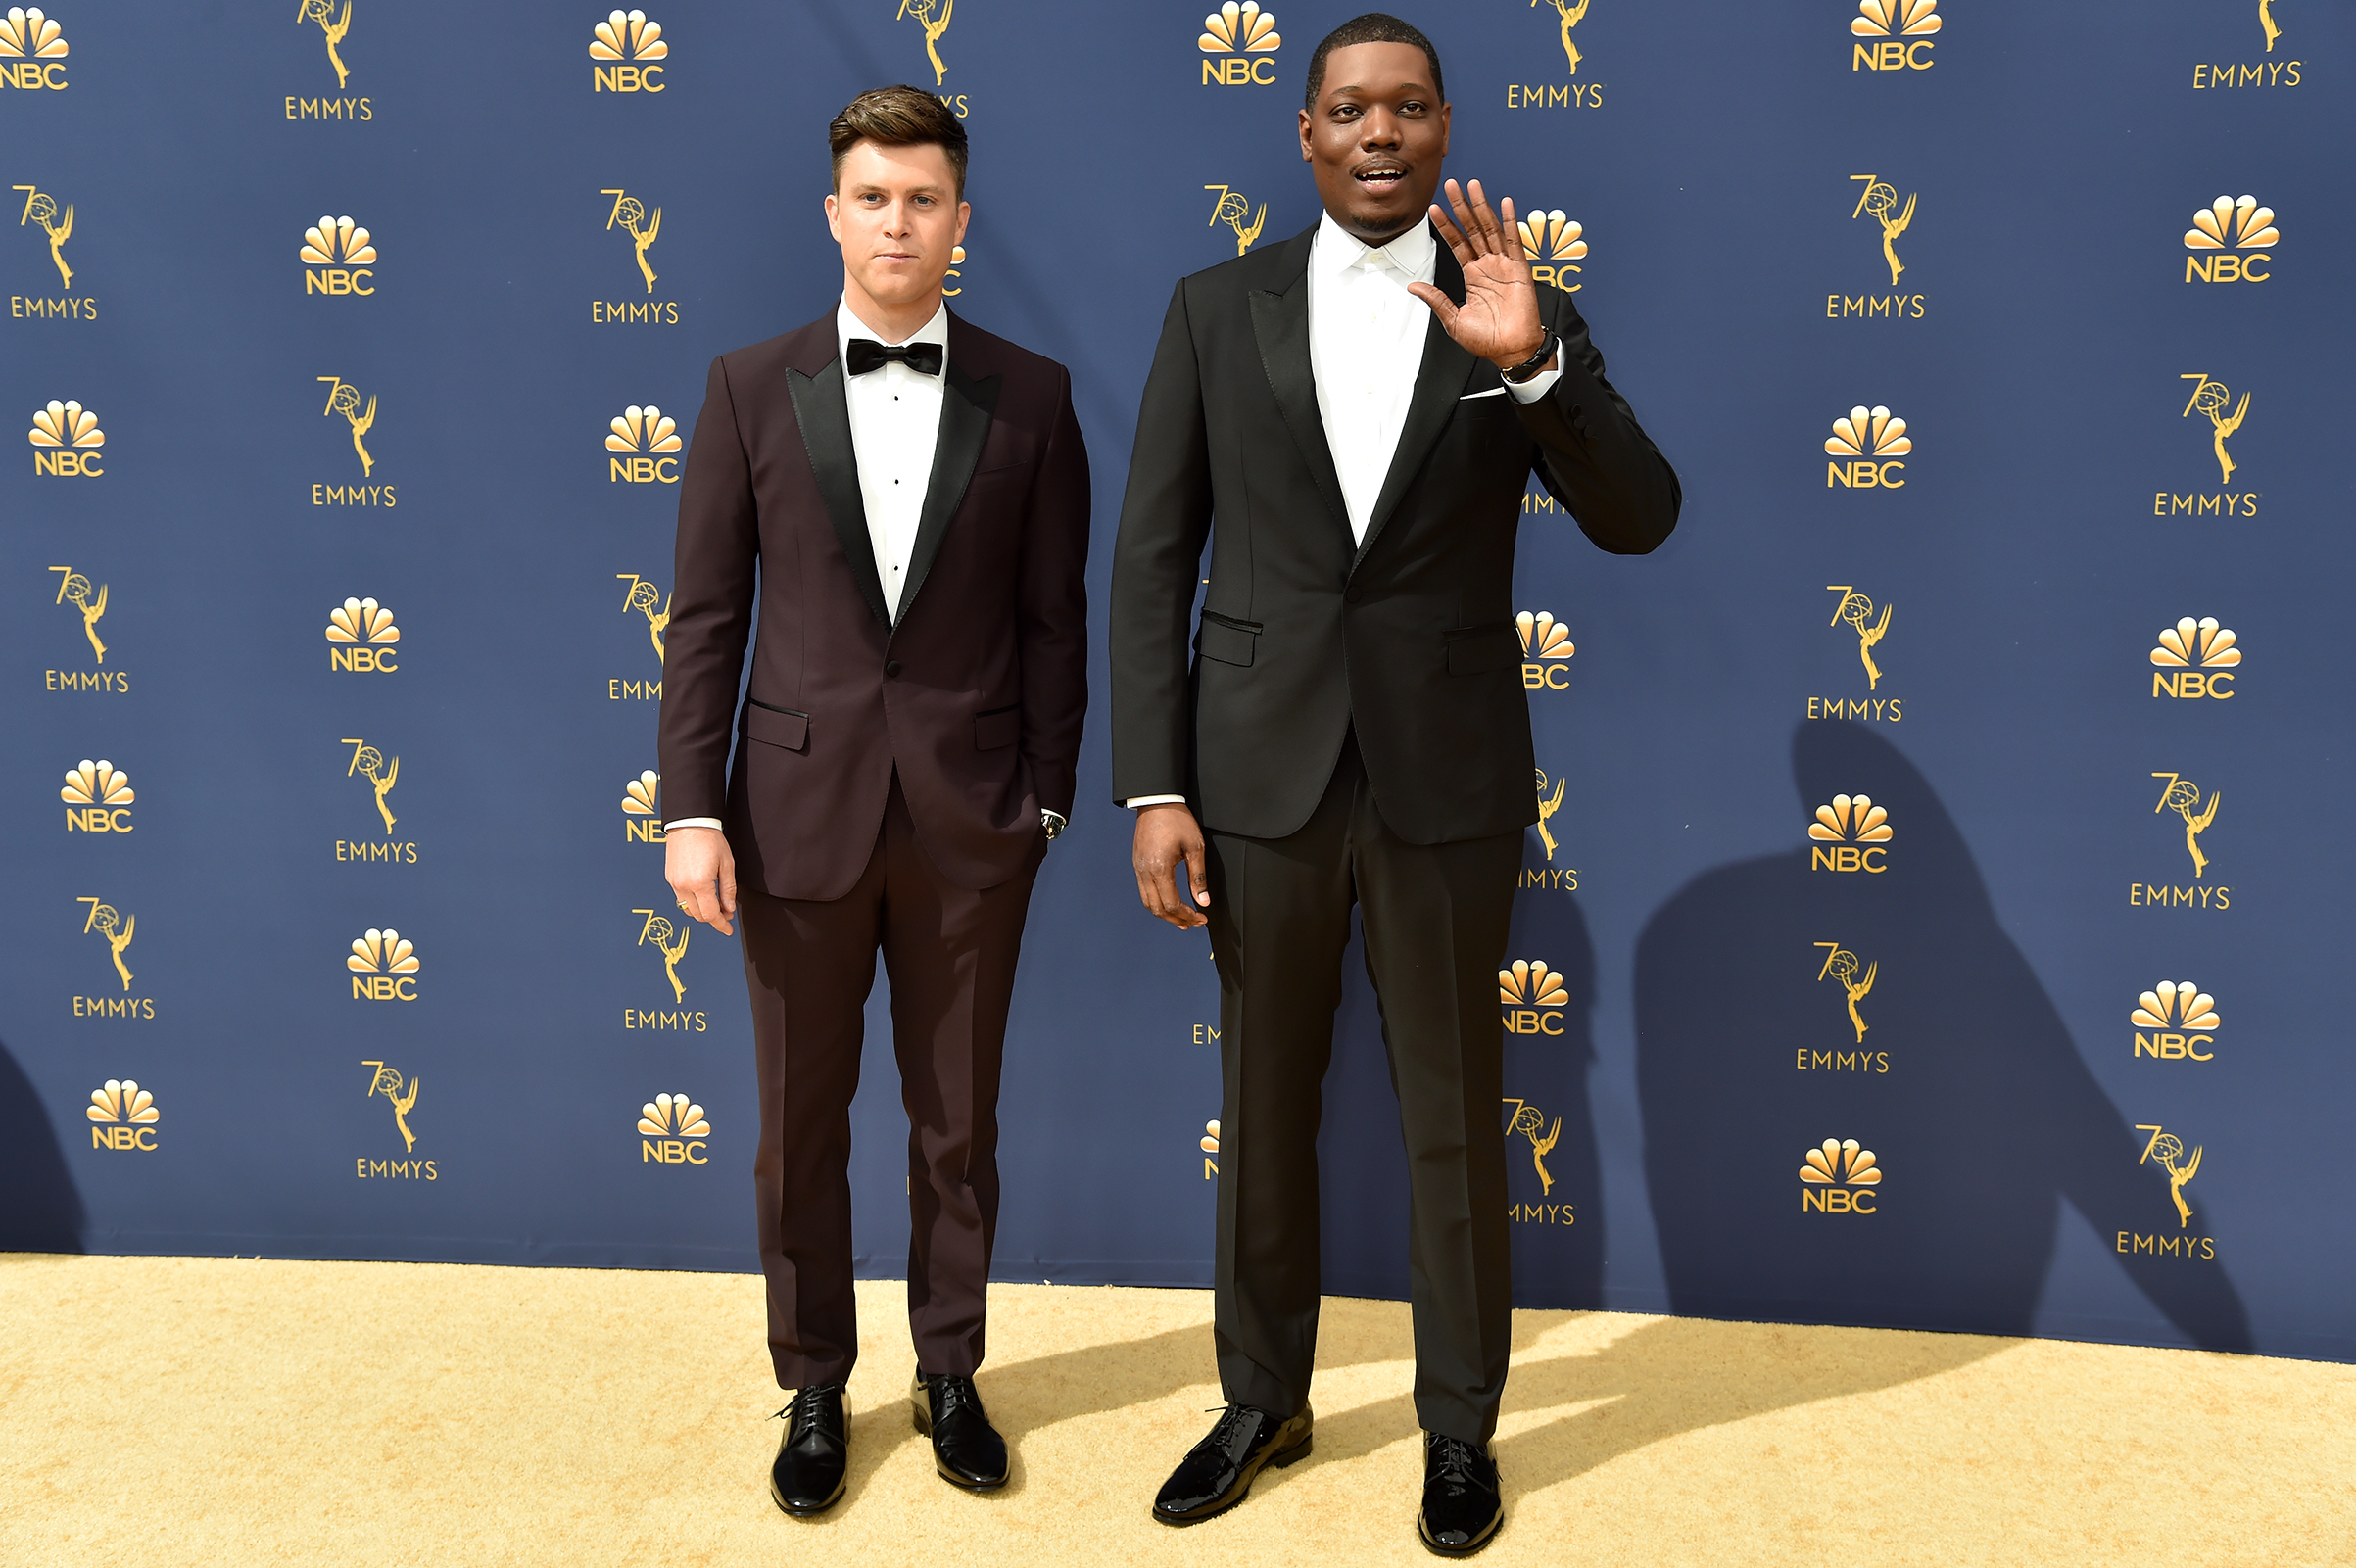 Hosts Colin Jost and Michael Che arrive at the 70th Emmy Awards on Sept. 17. (Jeff Kravitz—FilmMagic/Getty Images)